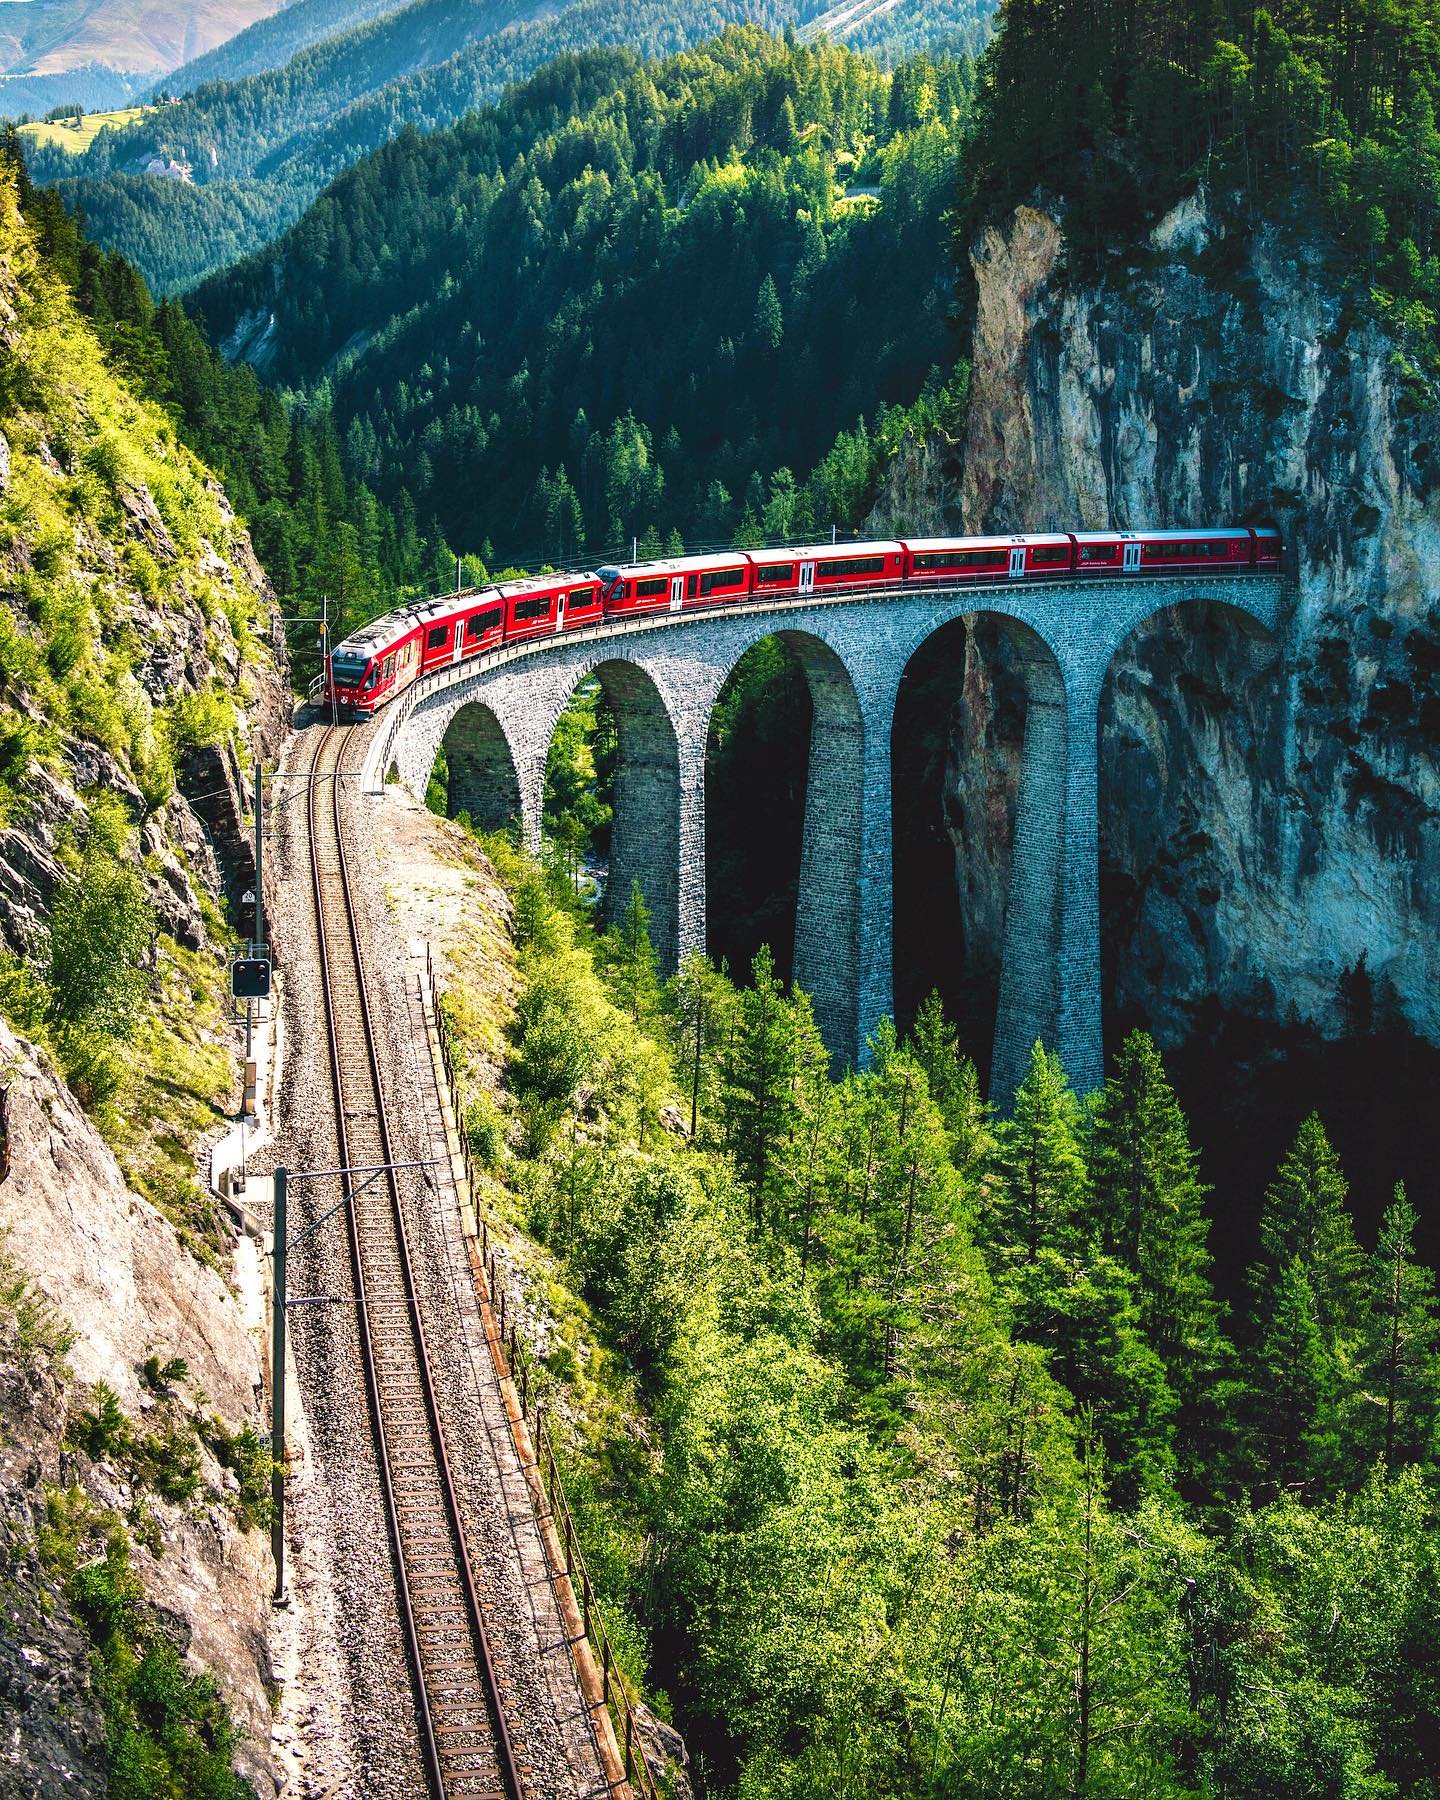 A bridge which stands out of all the bridges on this planet: the Landwasser Viaduct...✨🌲
.
.
.
.
#wildernessnation #condenasttraveller #exploringourglobe #folkgreen #thediscoverer #nowdiscovering #pgdaily #theoutbound #the_folknature #folkscenery #wondermore #allaboutadventures #hikingtheglobe #visualsofearth #thegreatplanet #speechlessplaces #bestdiscovery #dreamingtravel #moodnation #earthoutdoors #earthoutdoors10k #discoverearth #outdoortones #wildernesstones #lensbible #instagood10k #adventurenthusiasts #outside_project #inlovewithswitzerland #graubünden